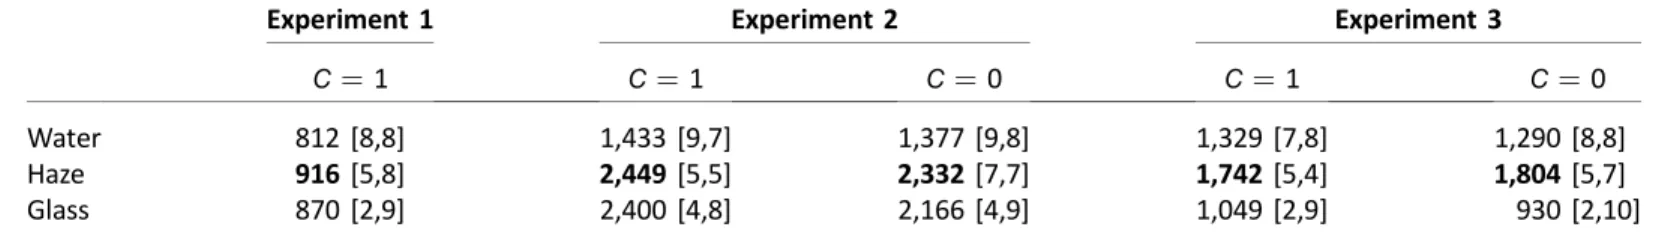 Table 1. L 1 distance sums for all experiments. Shown are the L 1 distance values for all trials for each layer condition (rows) in separate experiments for coherent ( C ¼ 1) and incoherent ( C ¼ 0) conditions (columns)